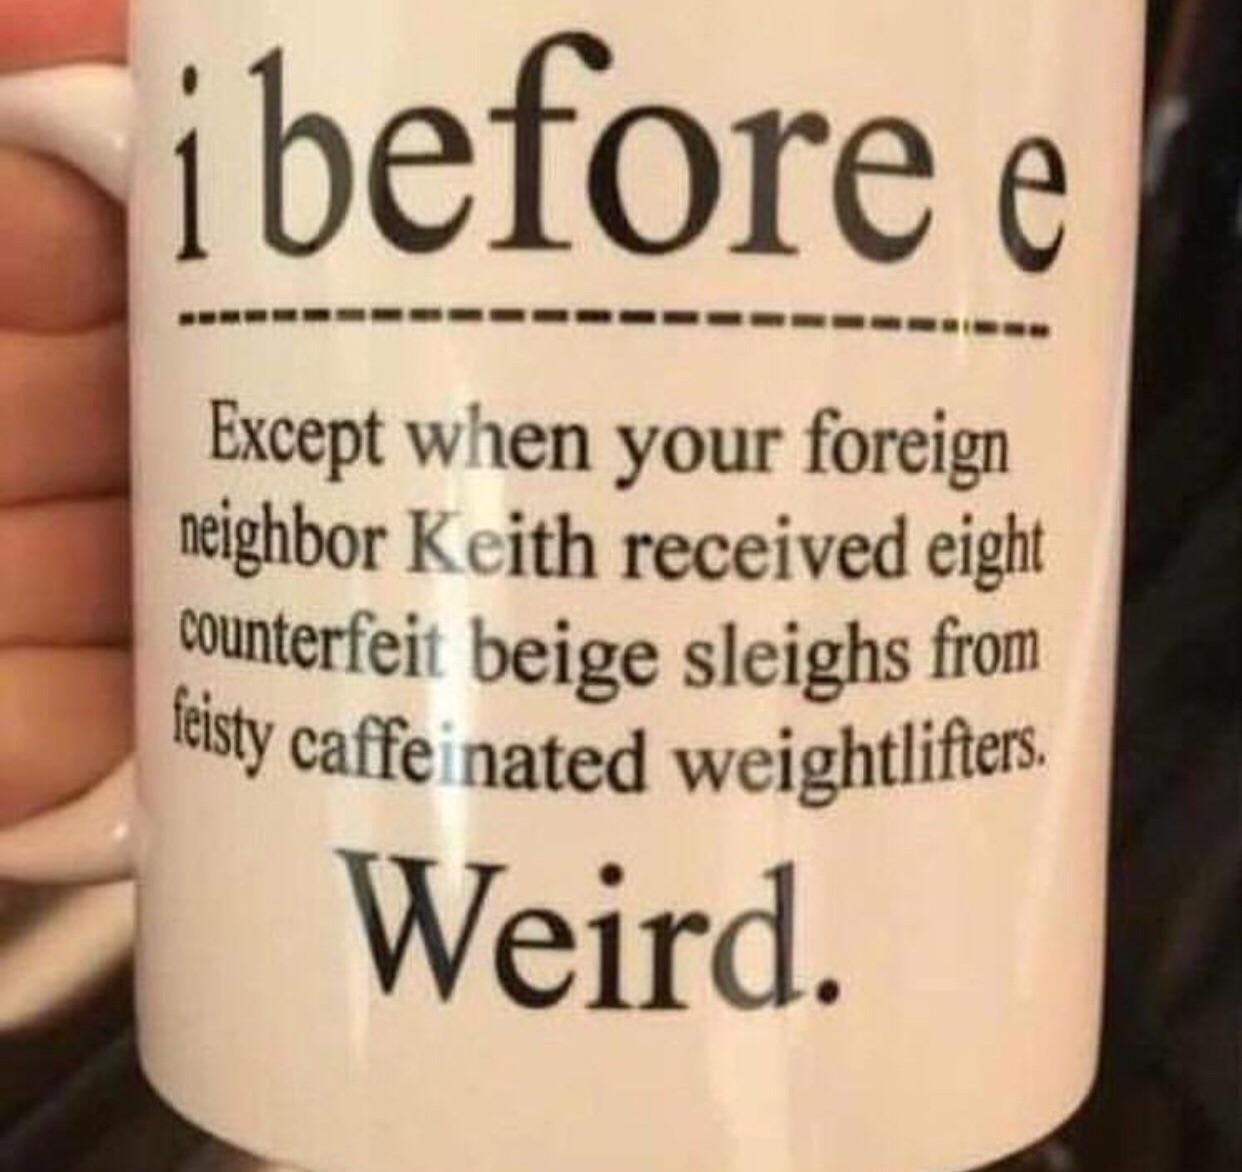 i before e except after wait, never mind